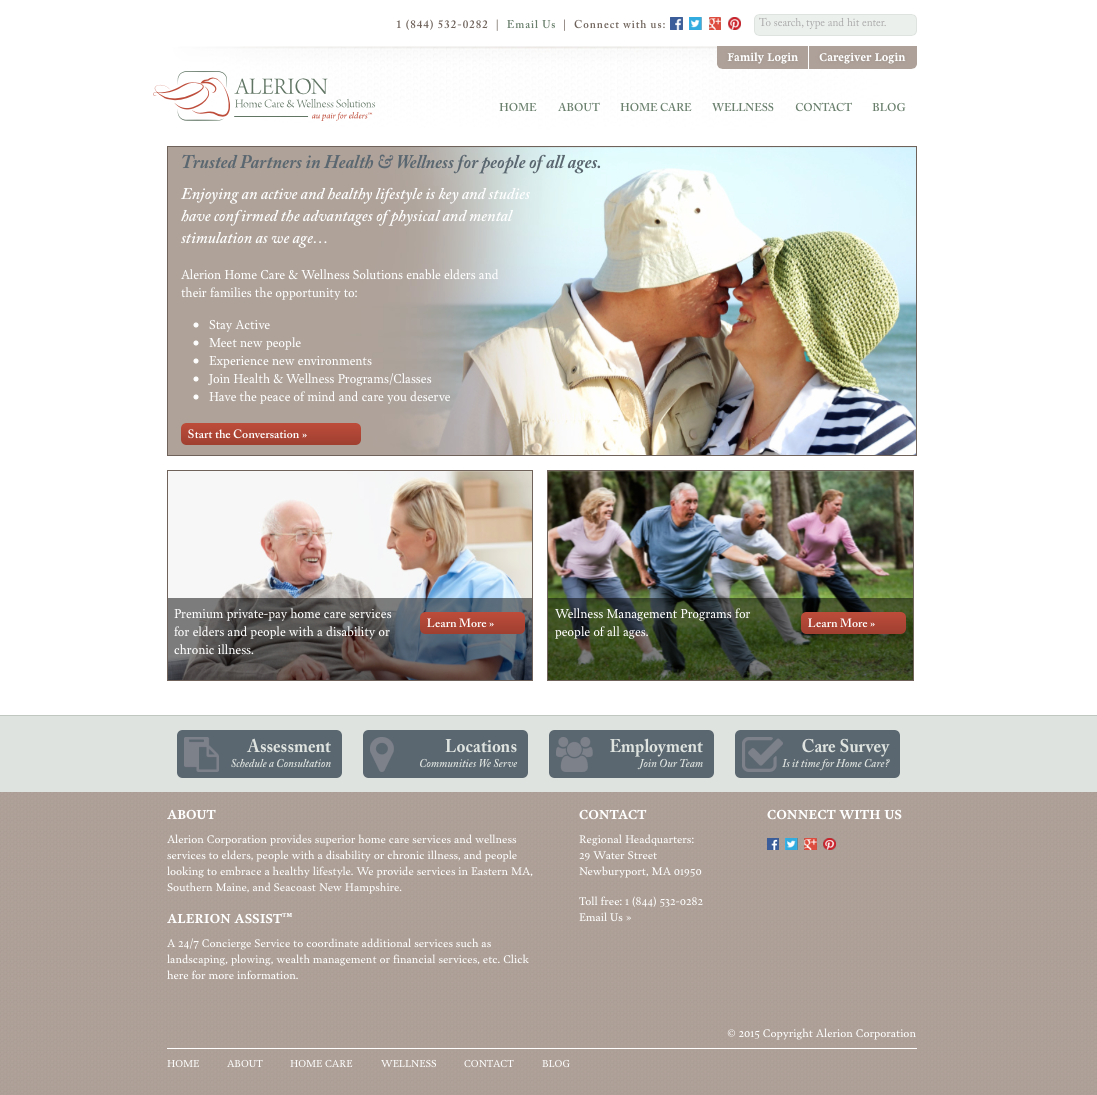 Alerion Home Care and Wellness Solutions